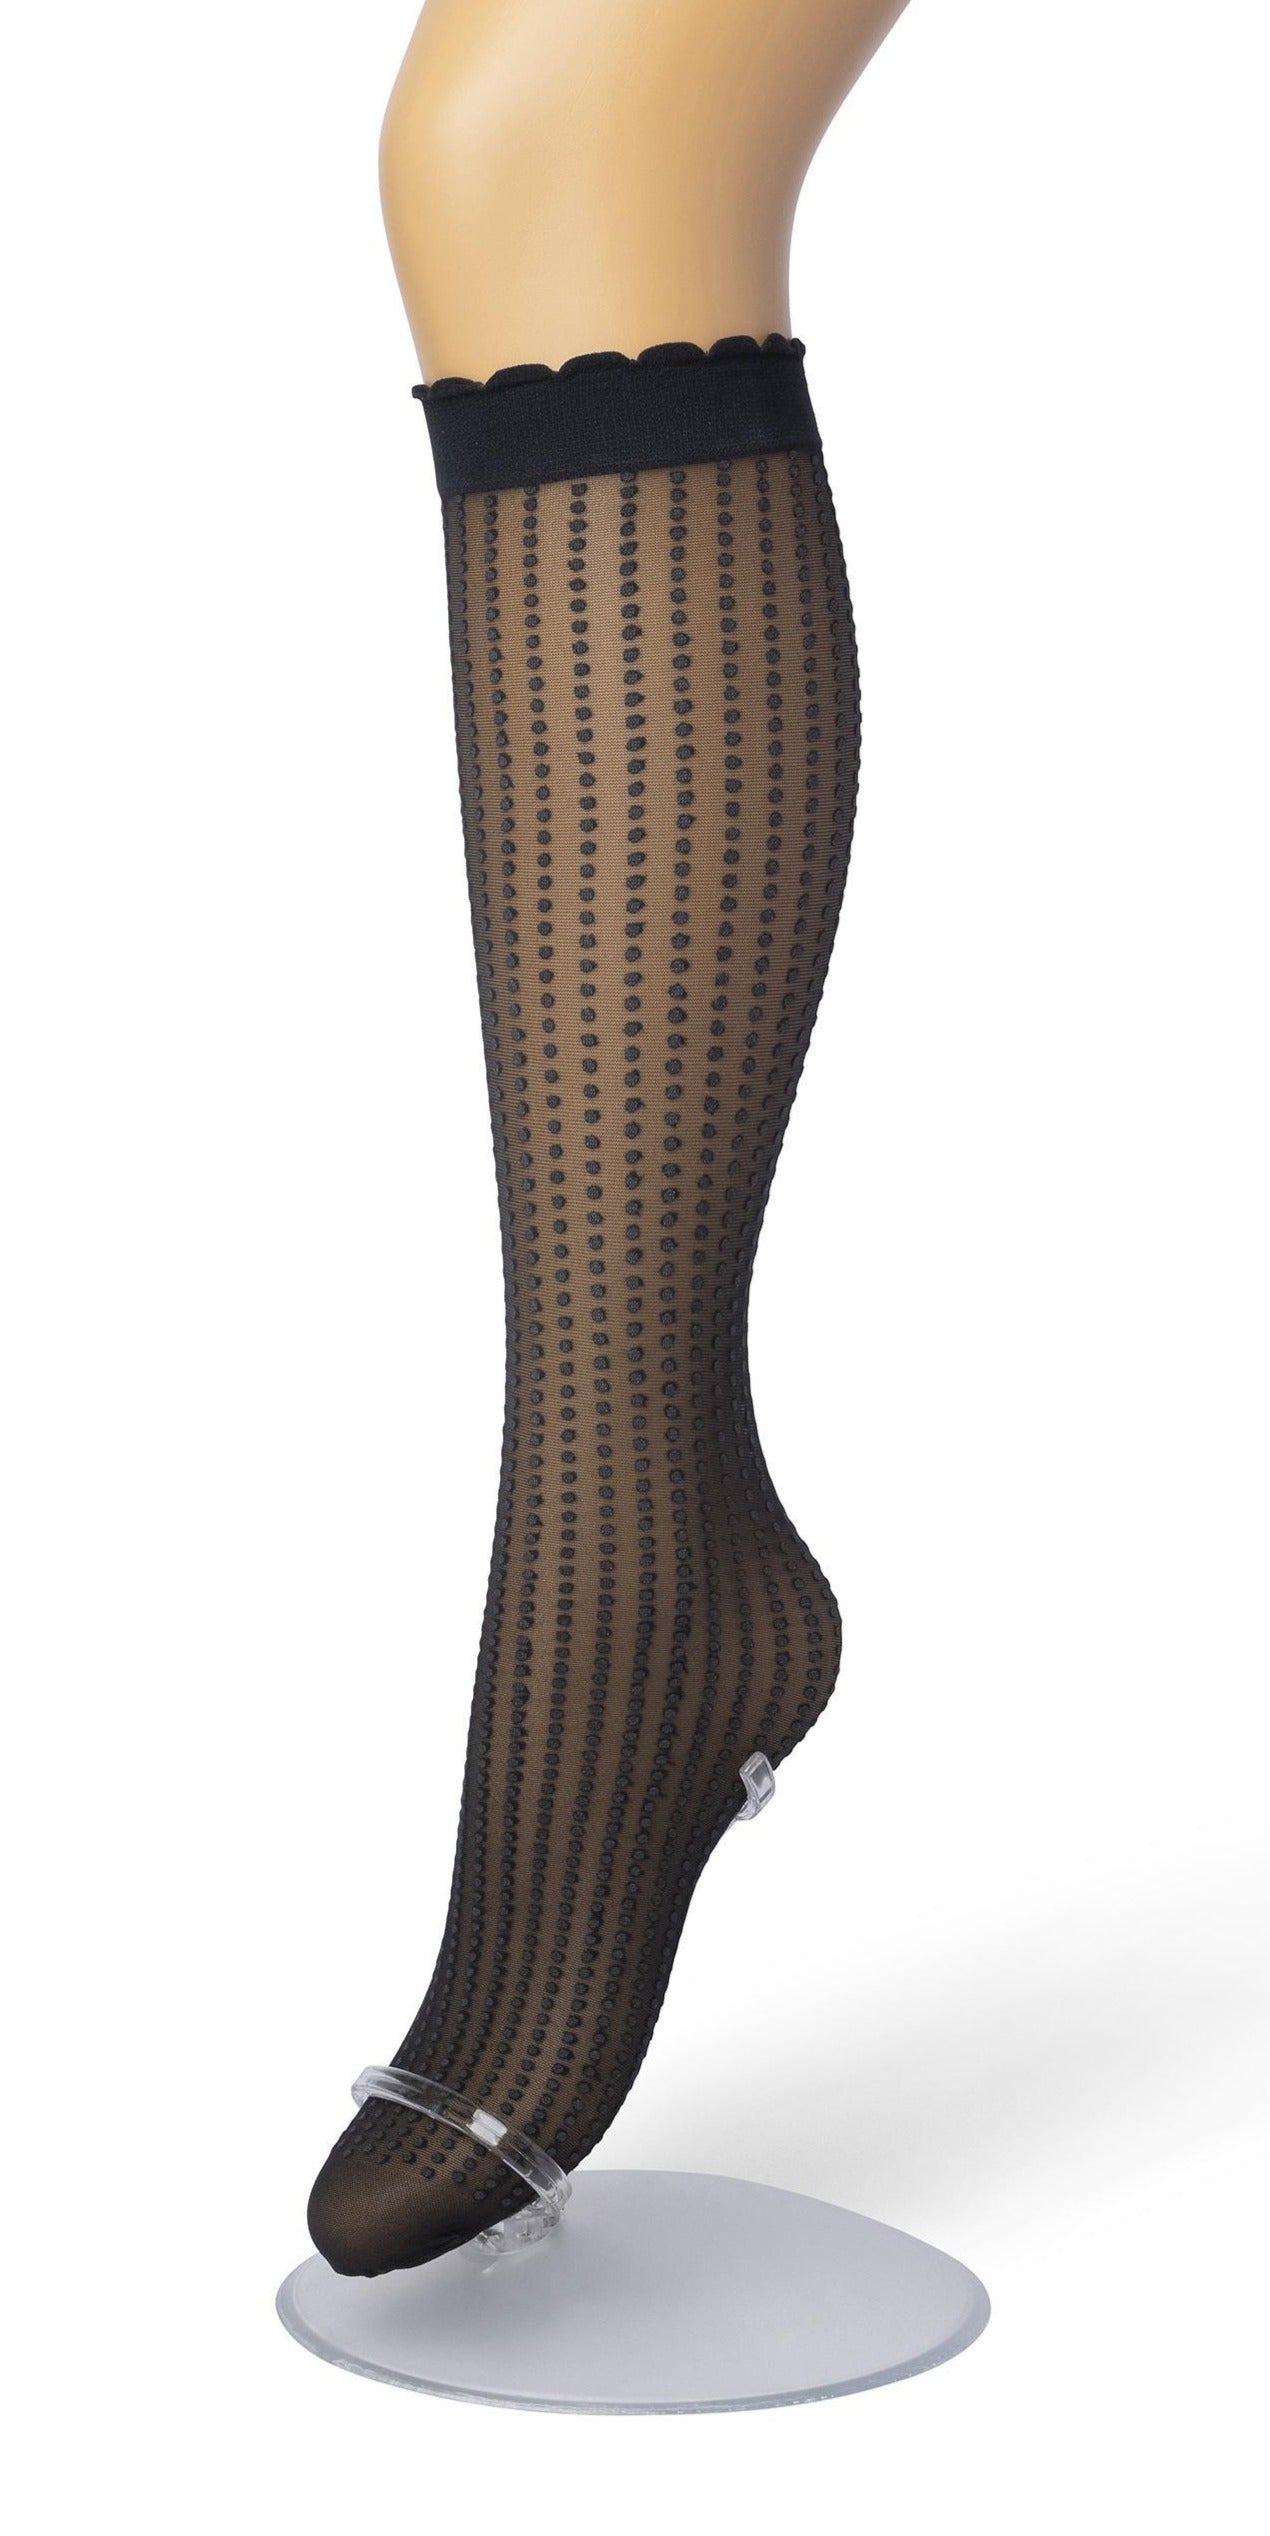 Bonnie Doon Batik Dots - Black sheer fashion knee-high socks with a dotted vertical stripe pattern, deep comfort cuff with scalloped edge.